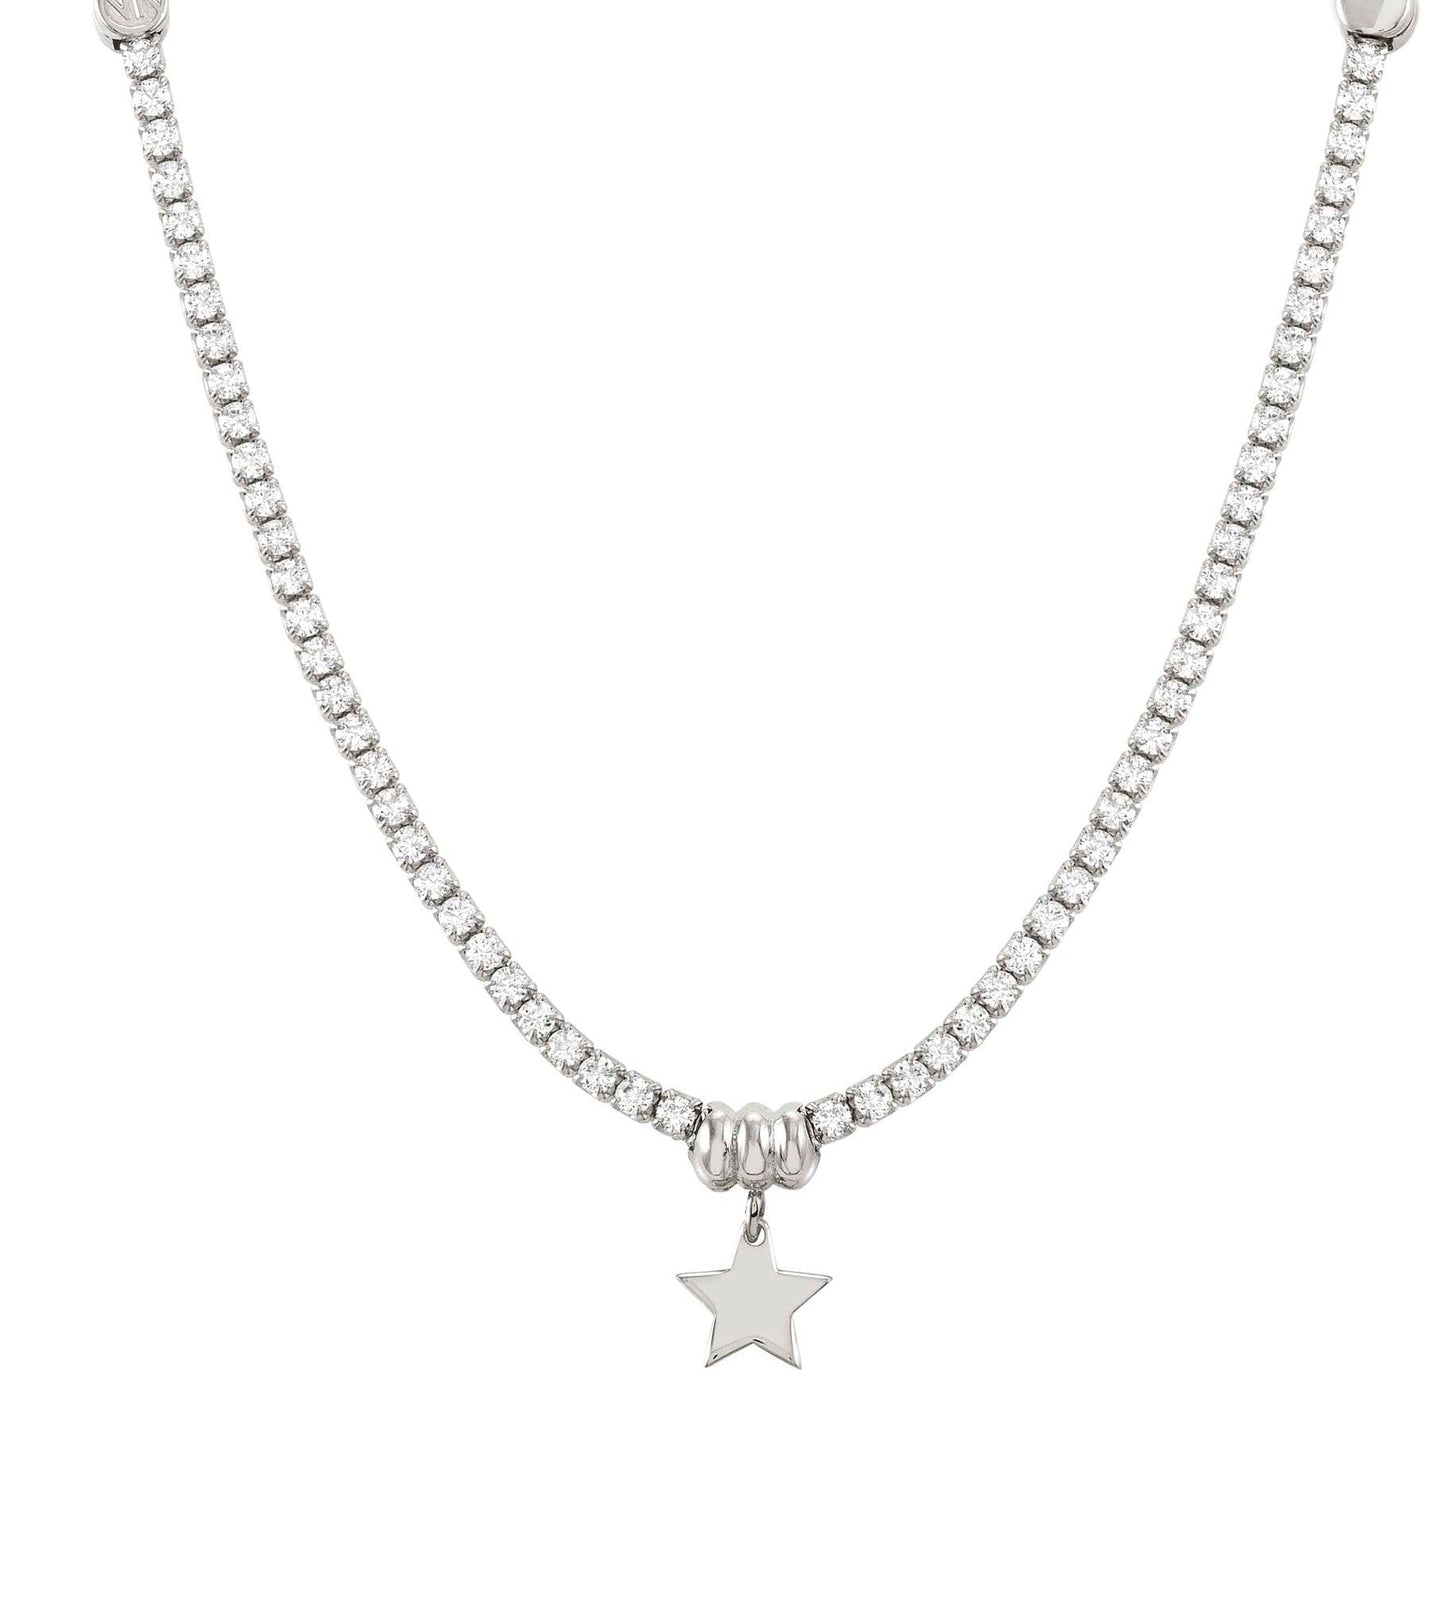 Nomination Chic & Charm Necklace with CZ Silver Star